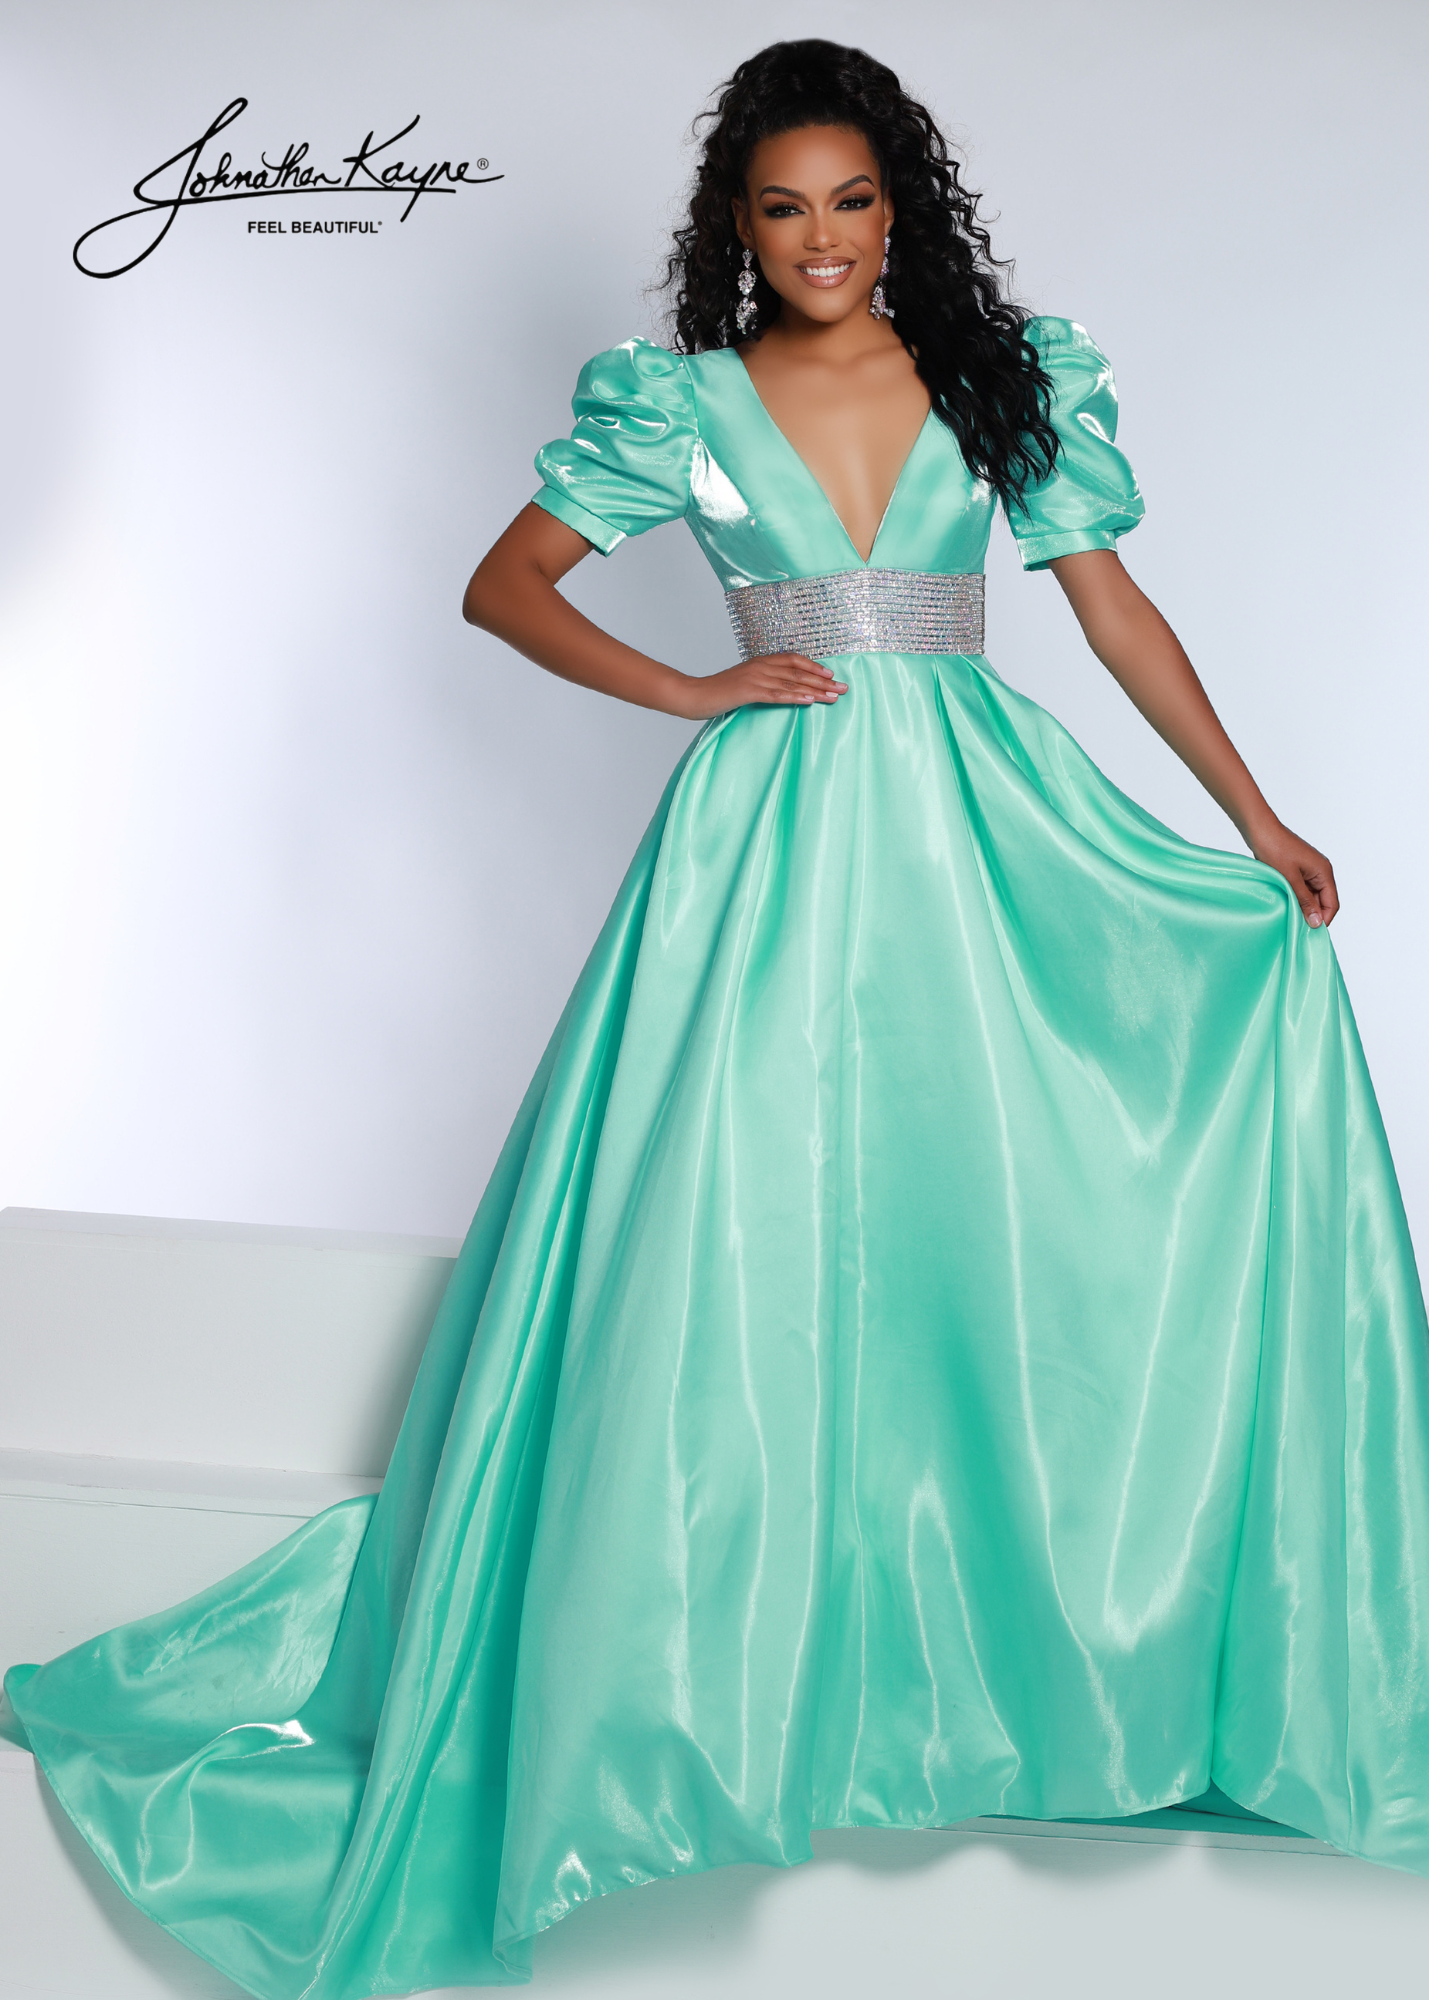 Johnathan Kayne 2692 Shimmer Satin A Line Puff Sleeve Prom Dress Crystal Waist Pageant Gown One of our best sellers from the fall, but LONG! This shimmer satin gown has puff sleeves and a V-neck bodice with a thick crystal trim waist band. Did we mention it has pockets?  Sizes: 00-24  Colors: Aqua, Cherry, Black, White